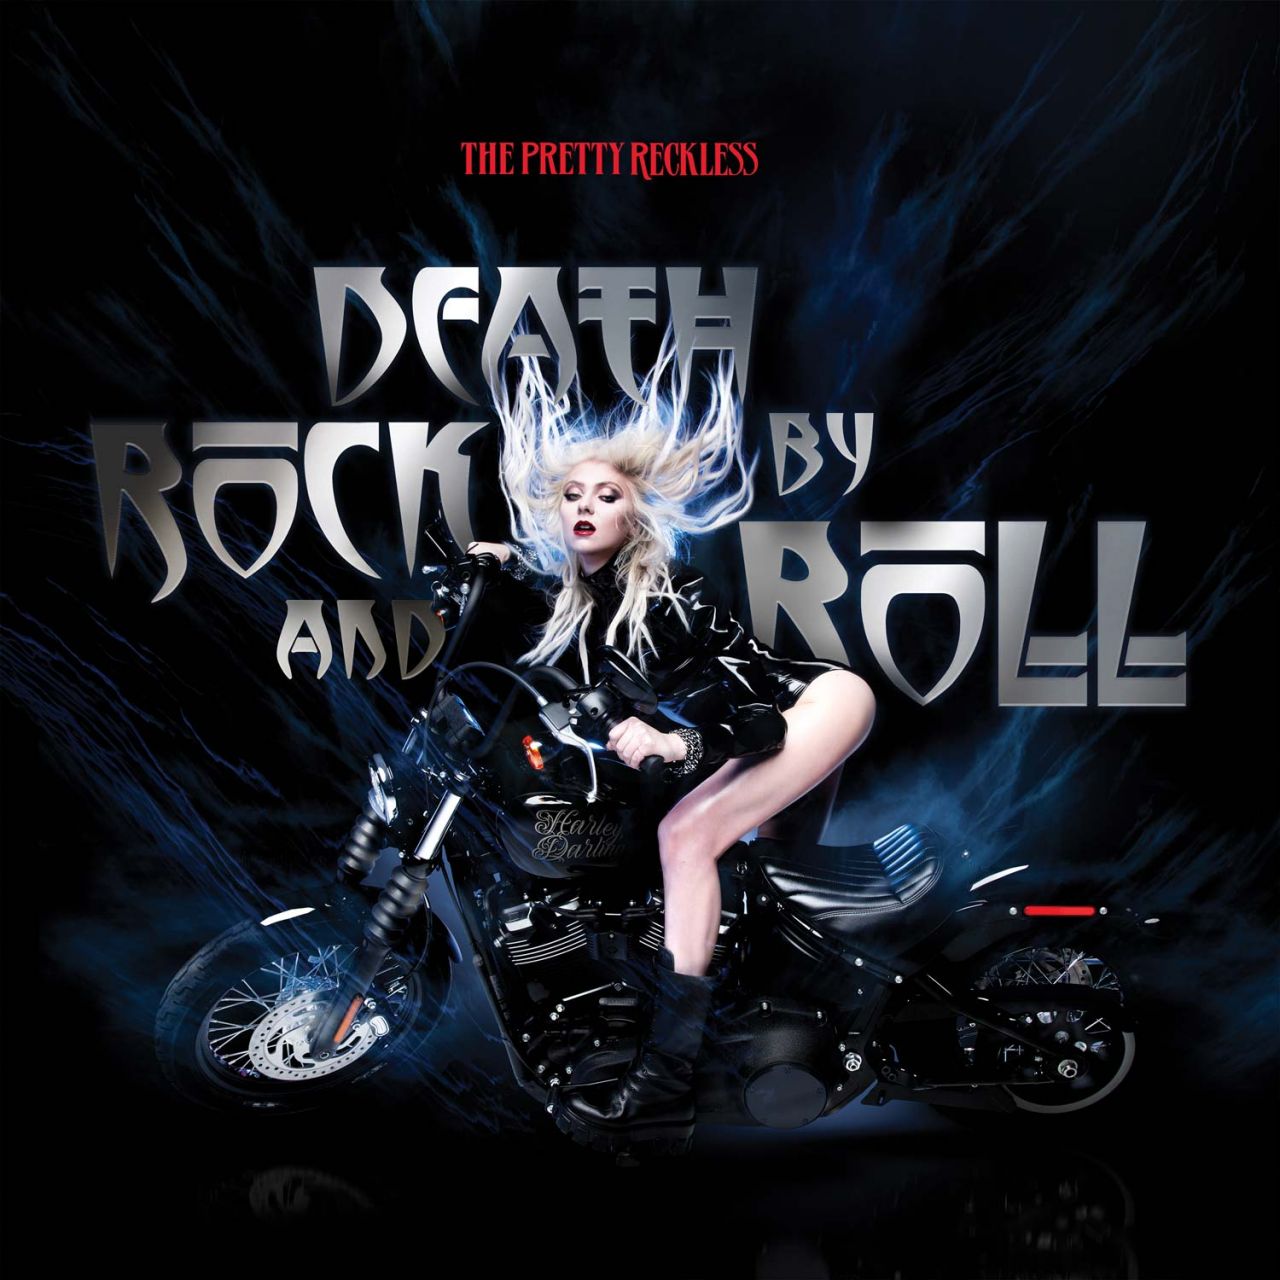 taylor-momsen-death-by-rock-and-roll-single-cover-2020-4.jpg